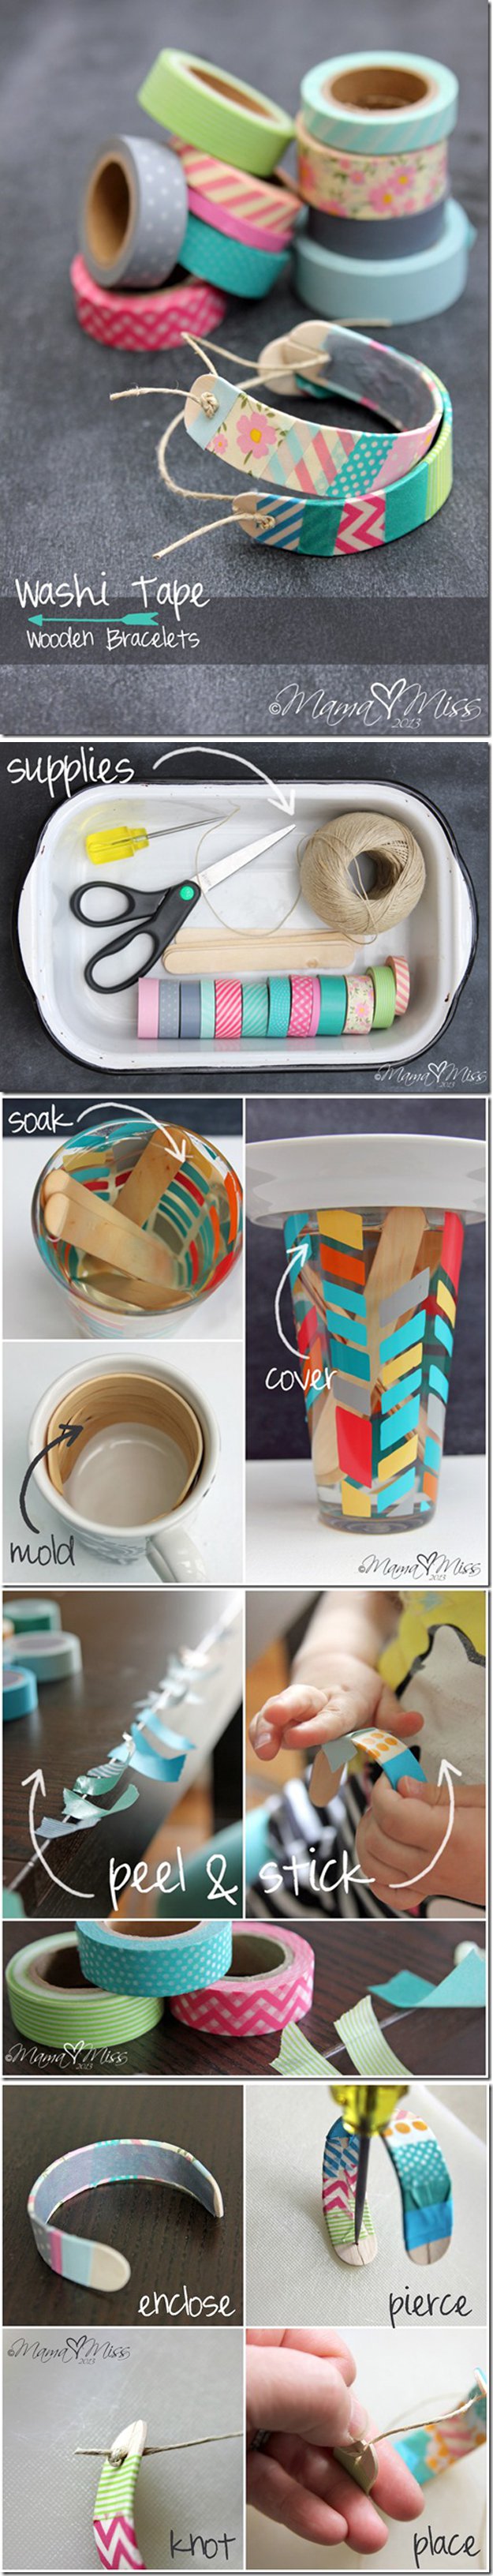 Washi Tape Crafts - DIY Washi TApe Bracelets - Wall Art, Frames, Cards, Pencils, Room Decor and DIY Gifts, Back To School Supplies - Creative, Fun Craft Ideas for Teens, Tweens and Teenagers - Step by Step Tutorials and Instructions #washitape #crafts #cheapcrafts #teencrafts